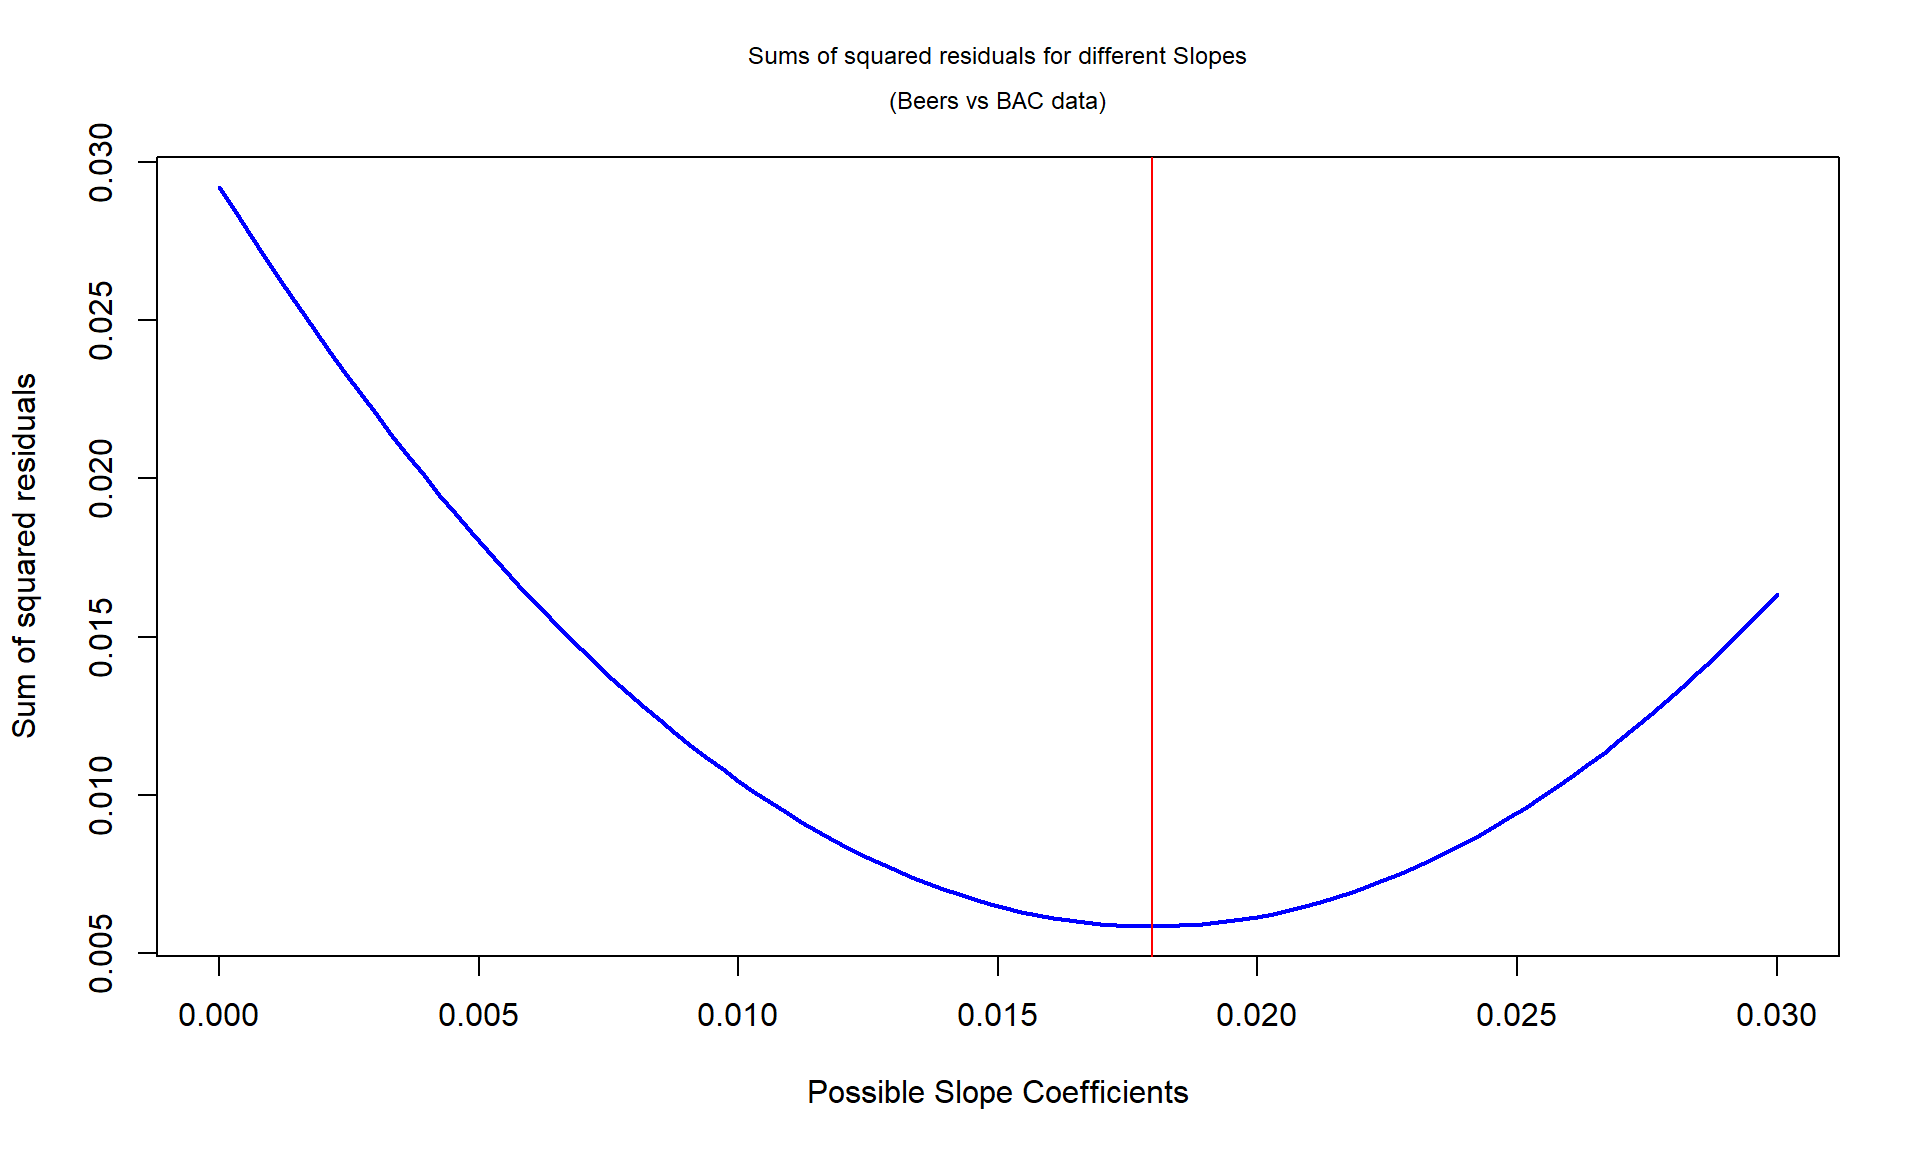 Plot of sum of squared residuals vs possible slope coefficients for Beers vs BAC data, with vertical line for the least squares estimate that minimizes the sum of squared residuals.